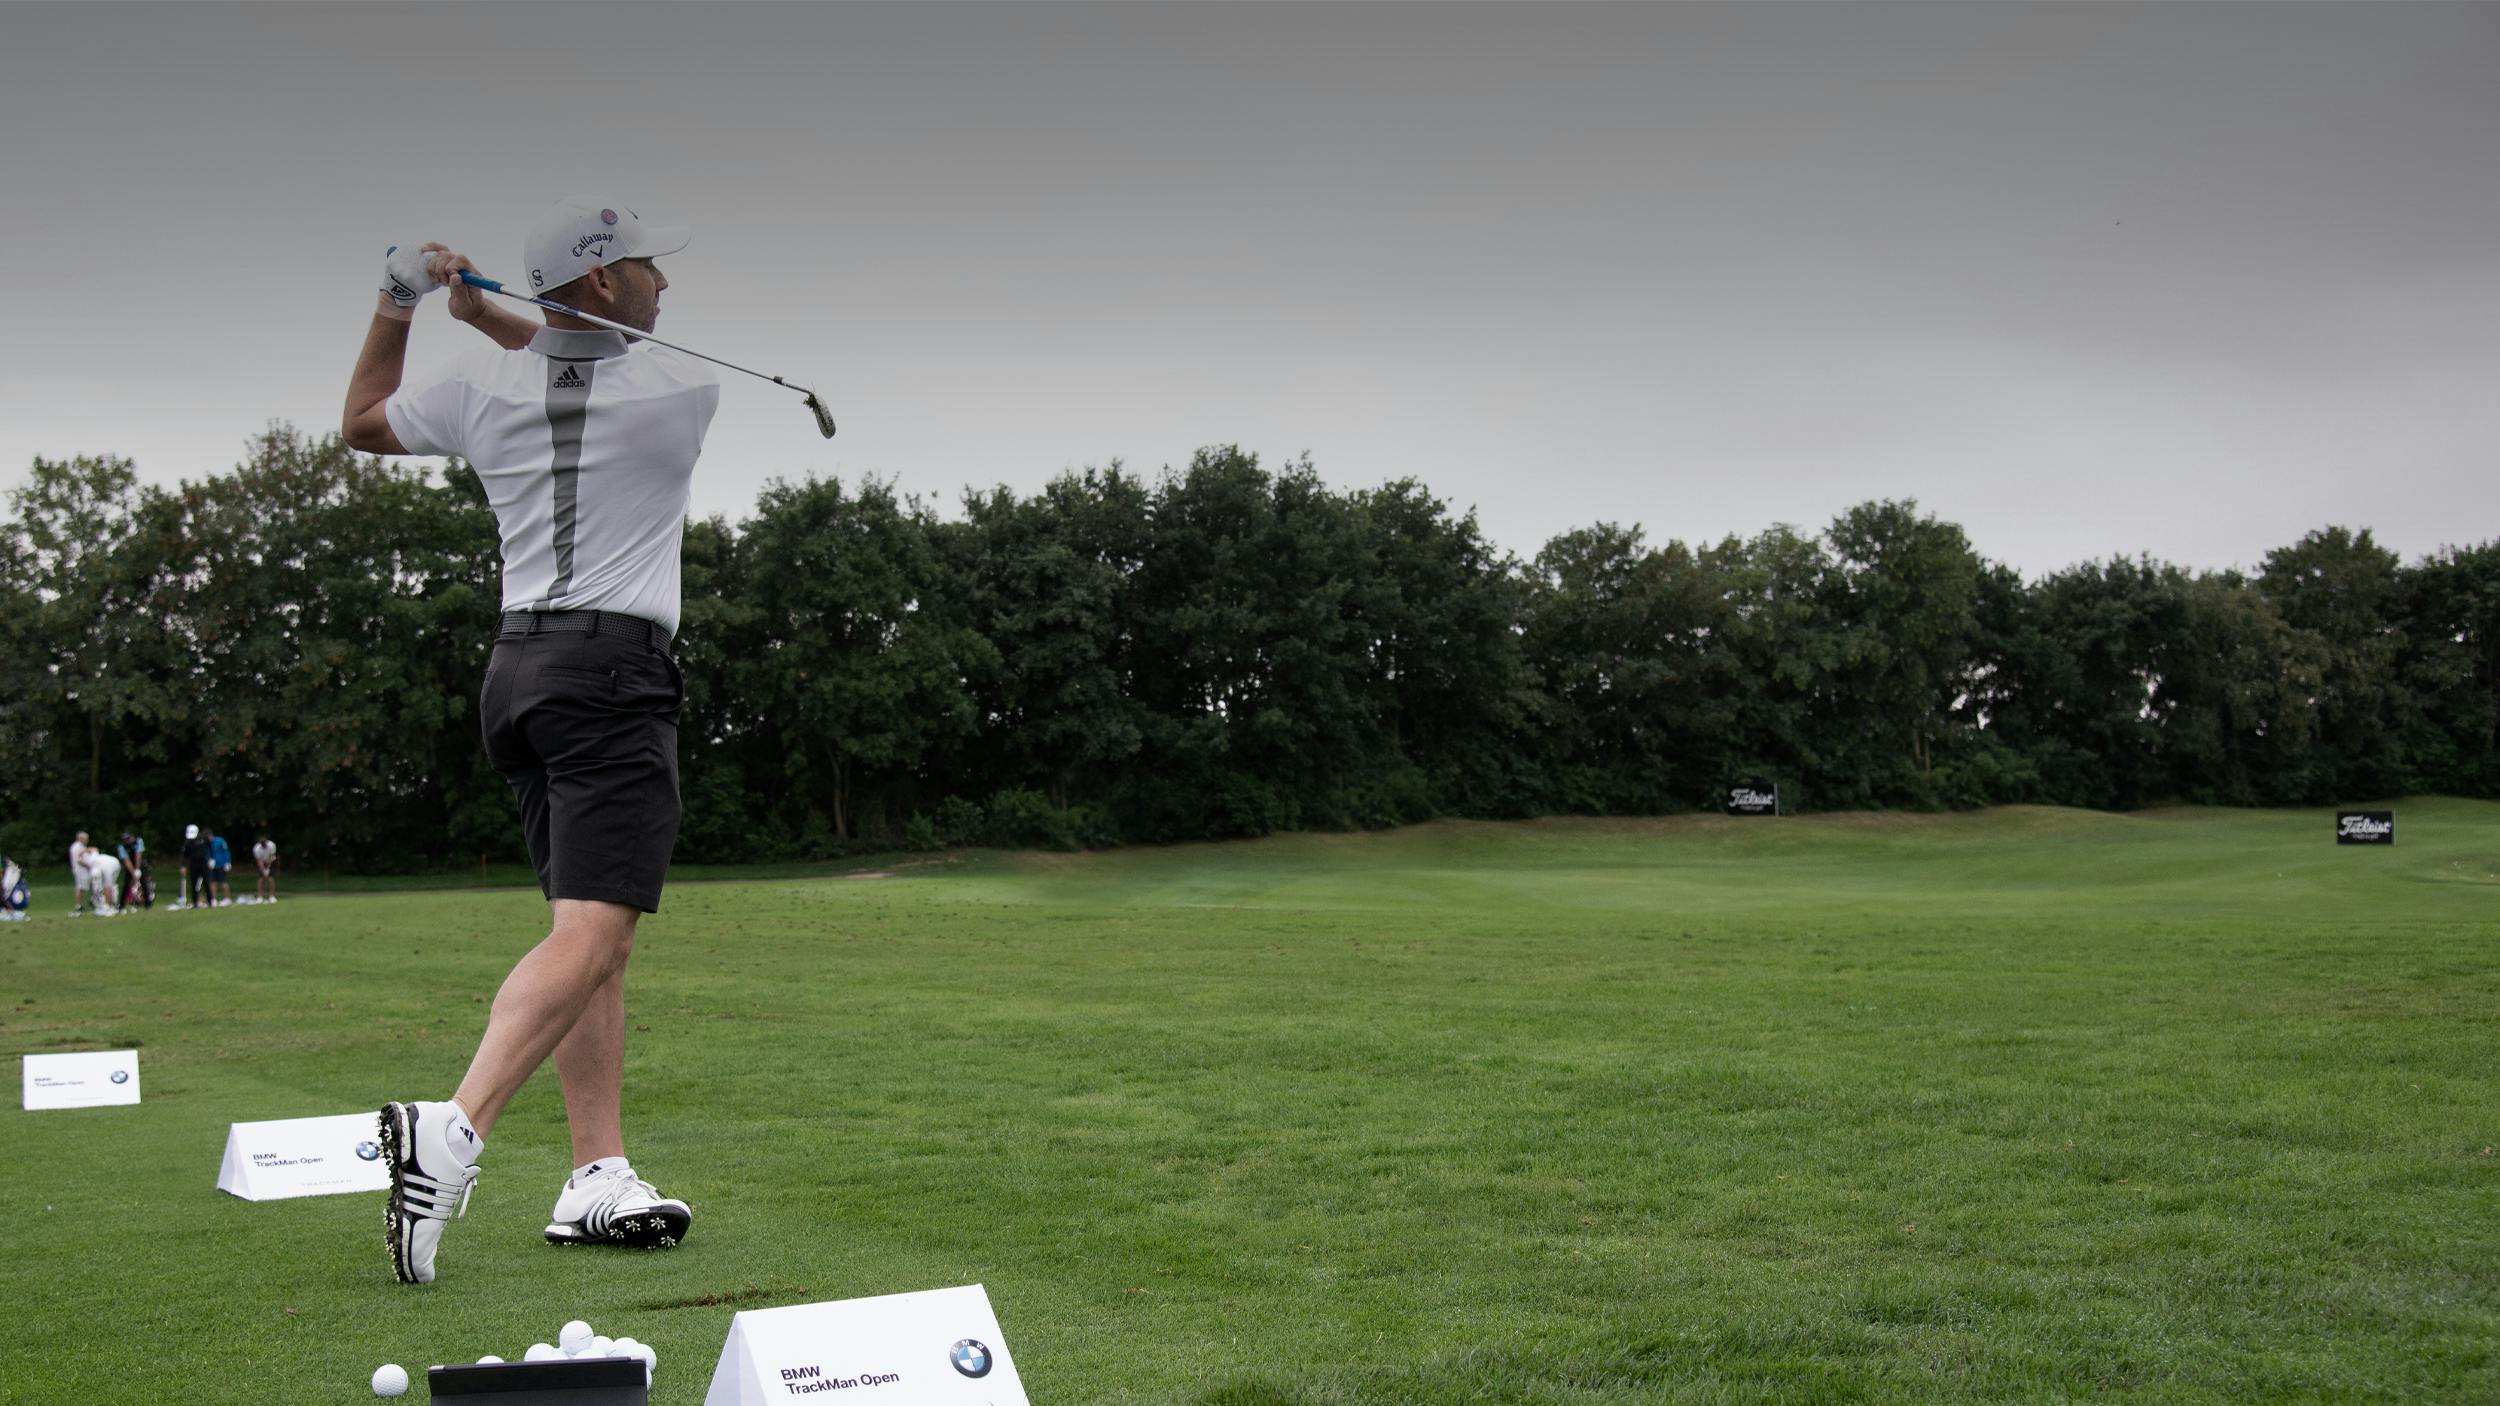 TrackMan Trusted by the best